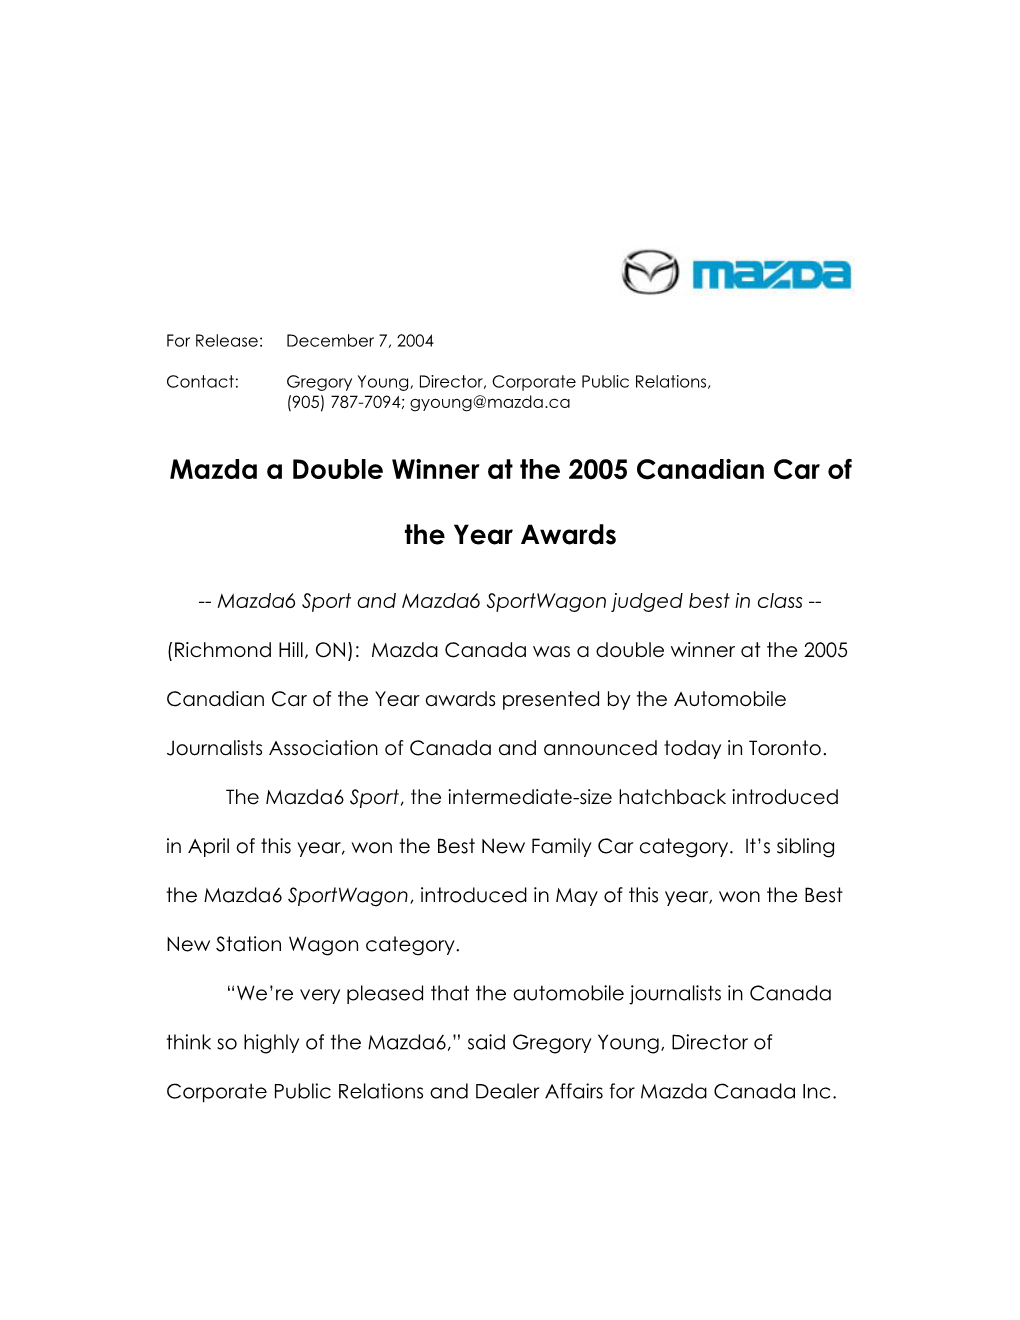 Mazda a Double Winner at the 2005 Canadian Car of the Year Awards